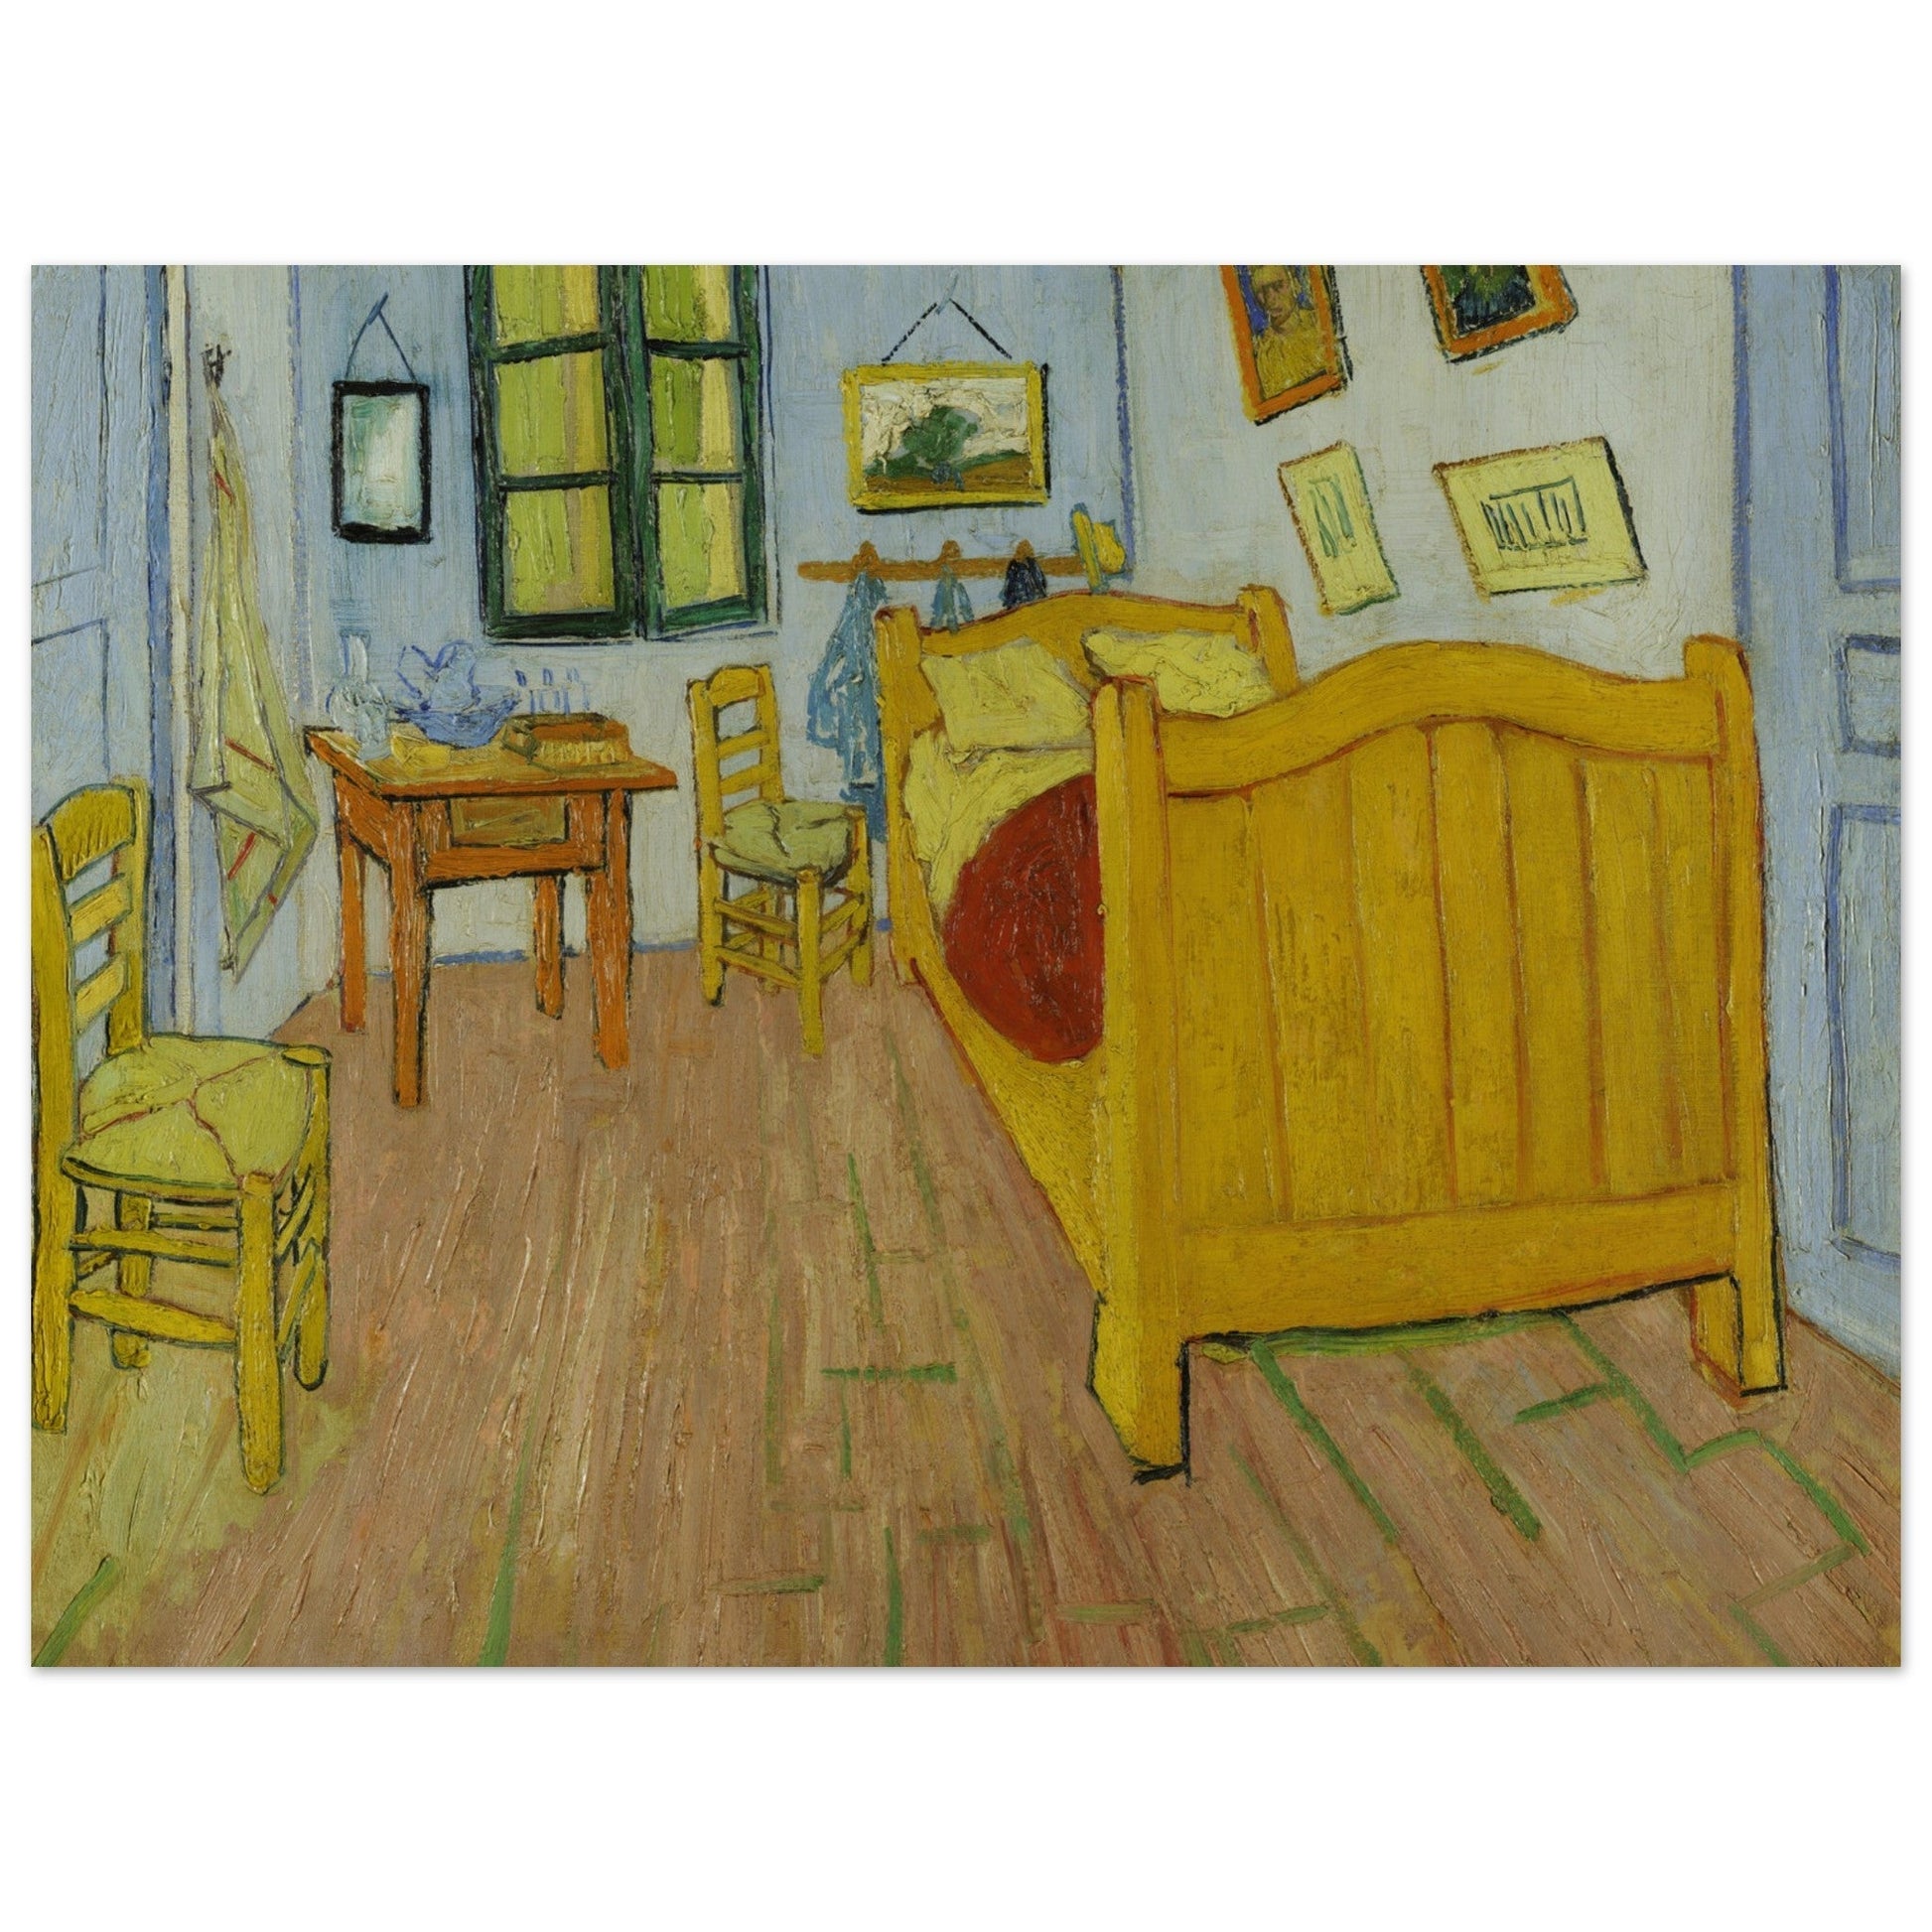 A Pop Art "Bedroom in Arles" poster with a yellow bed and chairs.